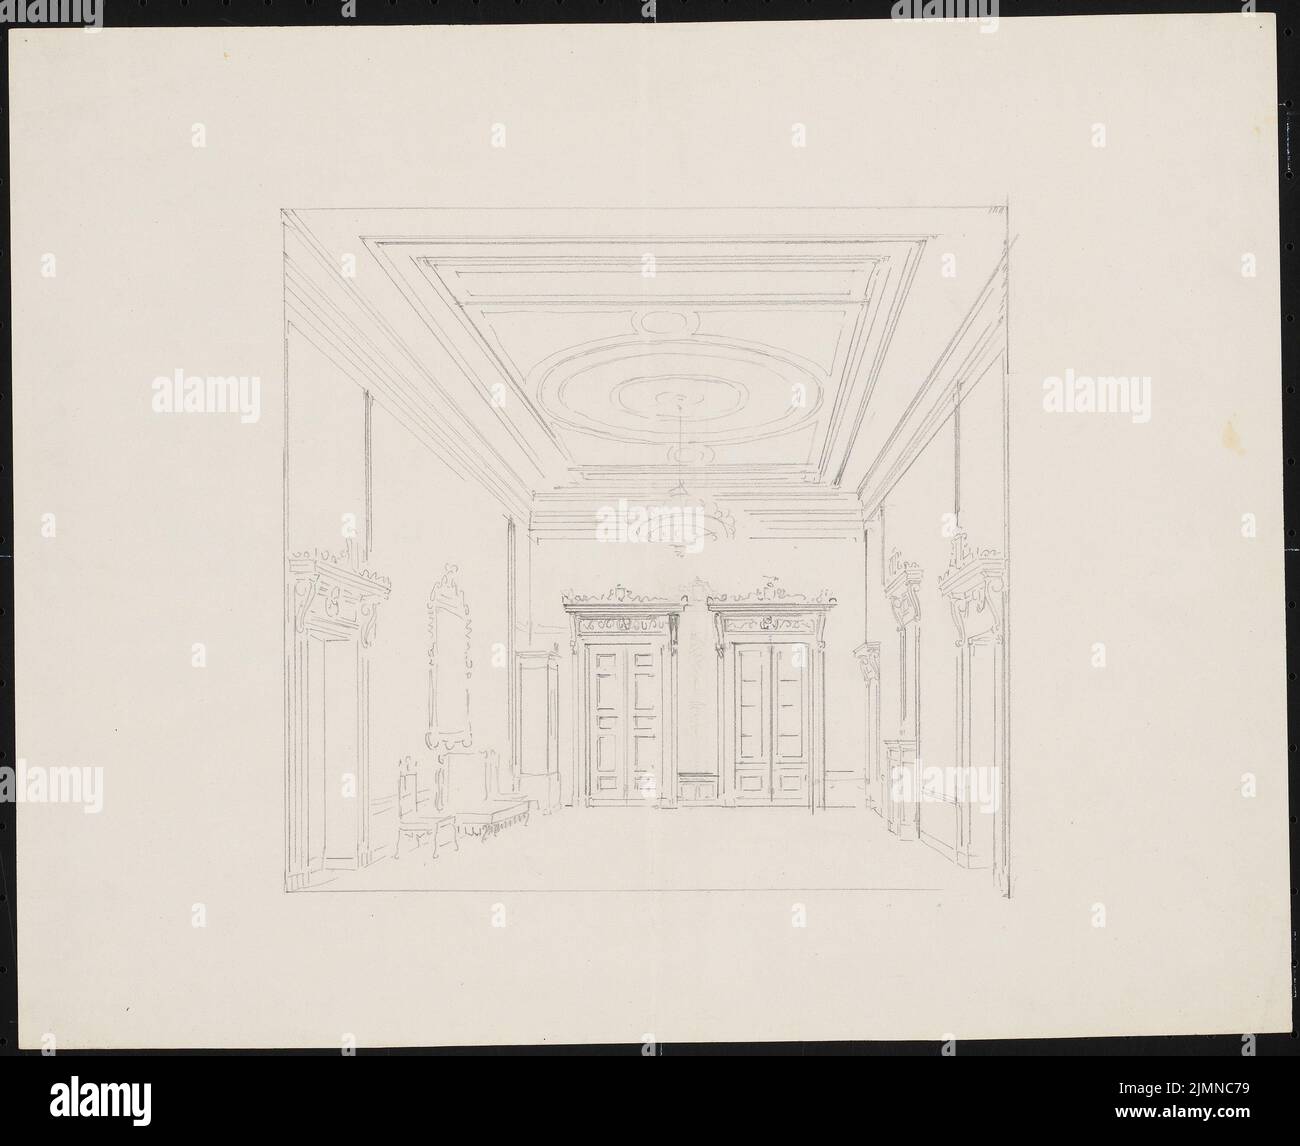 Knoblauch Eduard (1801-1865), Russian embassy, Berlin (1840-1841): Perspective view of the imperial room on the 1st floor. Pencil on paper, 35.5 x 43.7 cm (including scan edges) Stock Photo